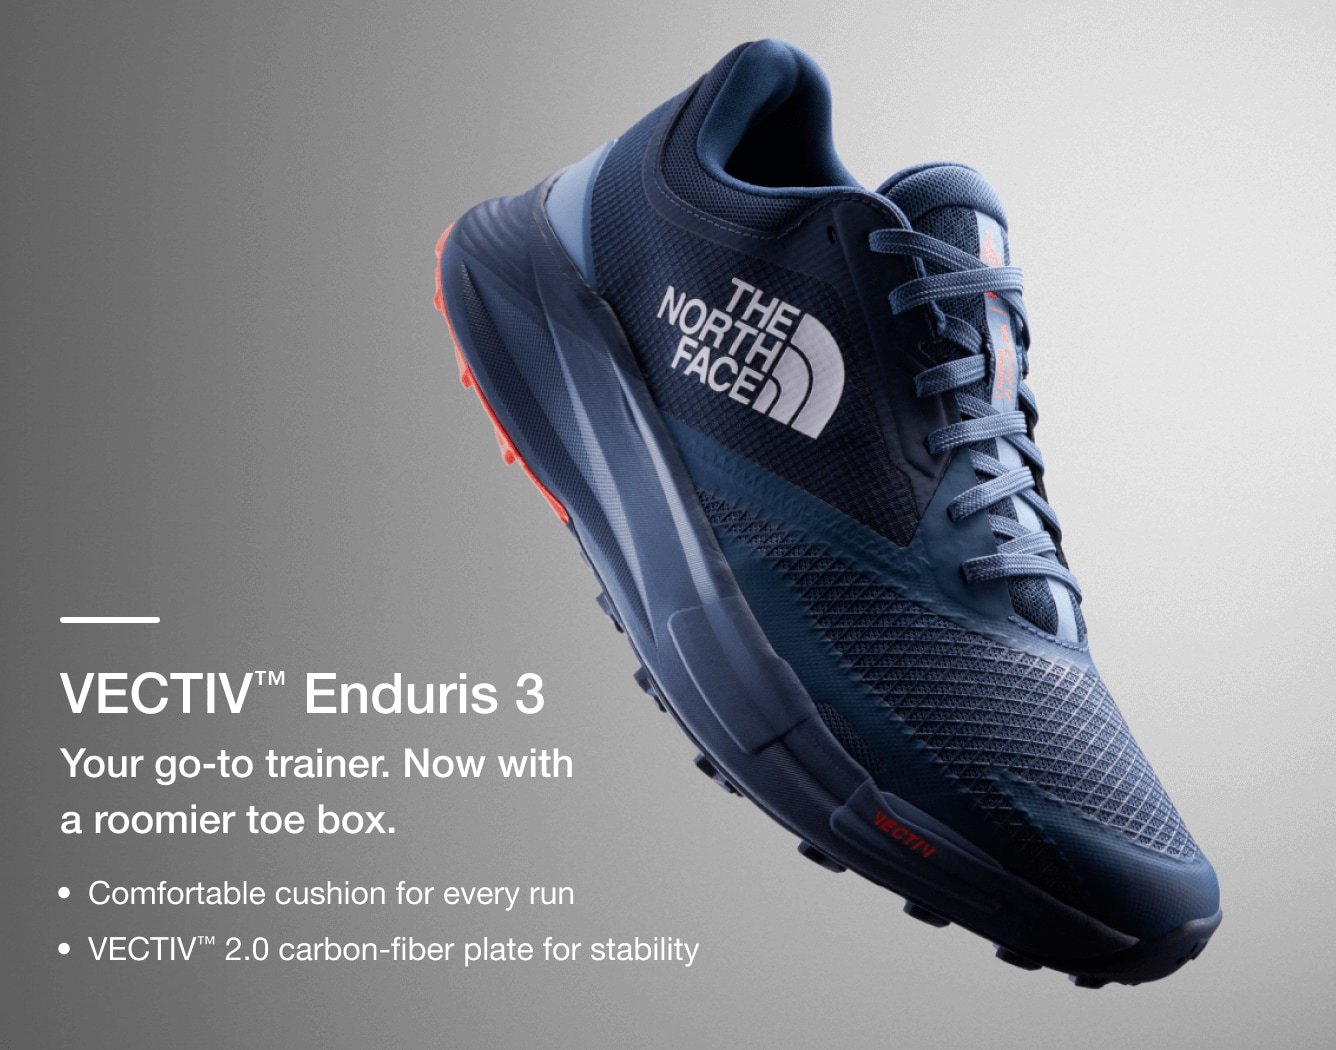 Studio shot of the VECTIV Enduris trail running shoe from The North Face with text overlay detailing features.